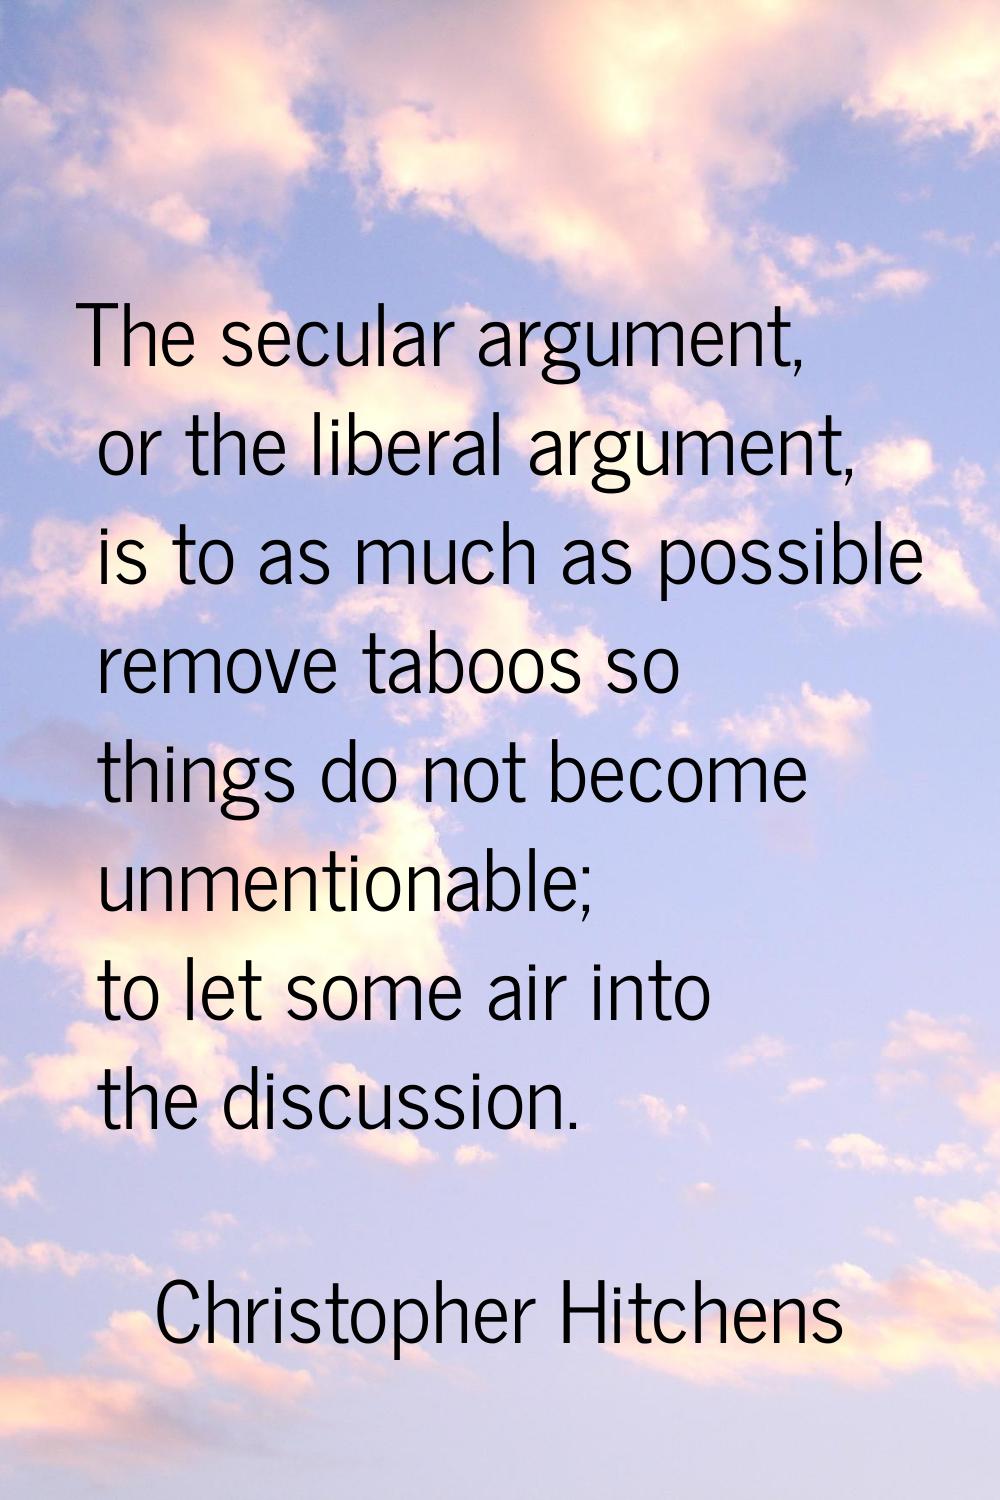 The secular argument, or the liberal argument, is to as much as possible remove taboos so things do